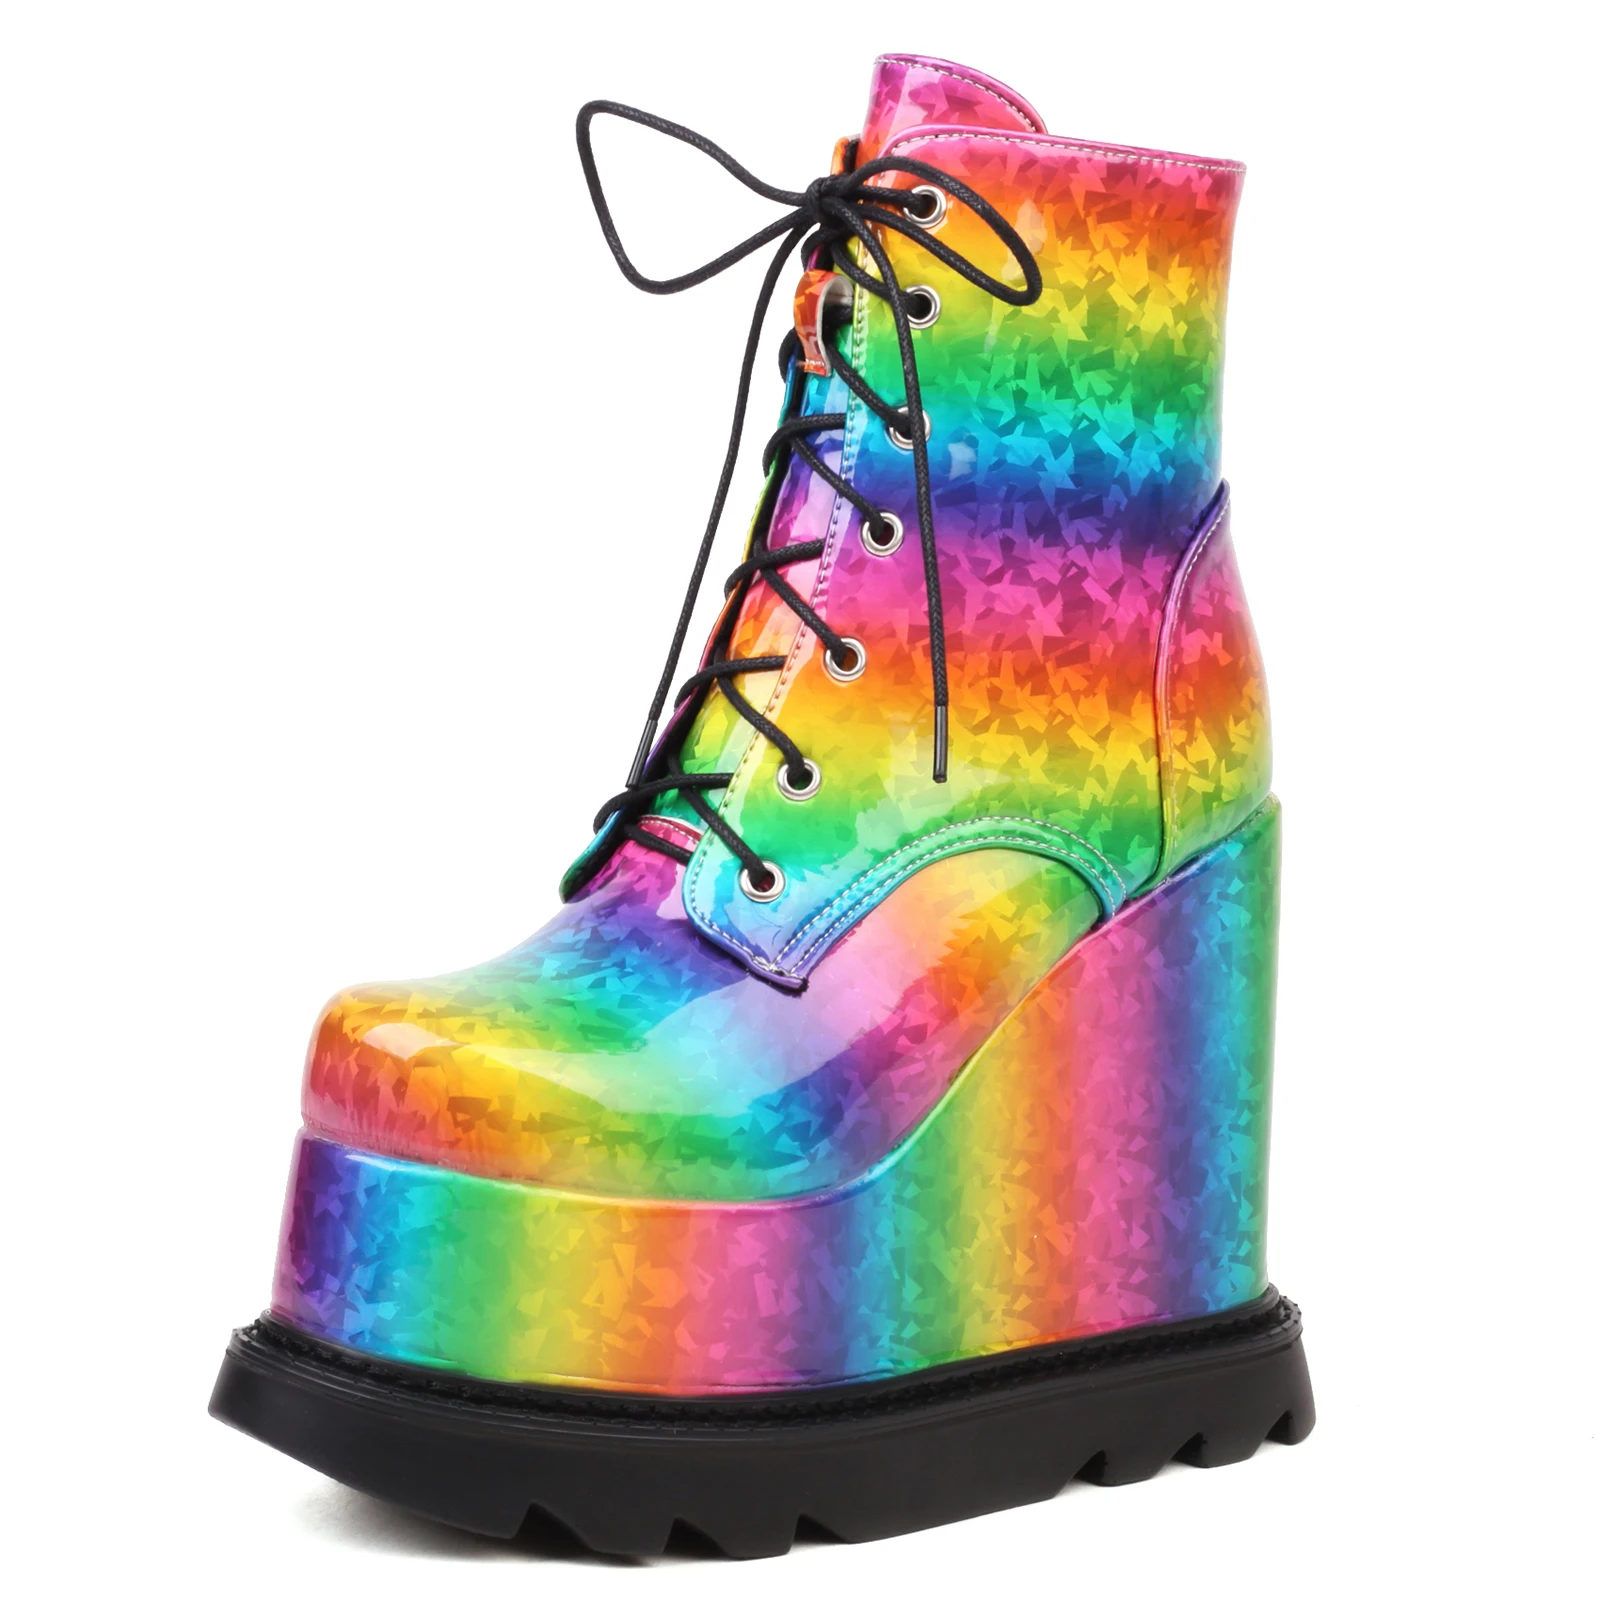 

Women Punk Goth Platform Wedge Ankle Boots Rainbow Square Toe High Heel Zip Lace Up Motorcycle Combat Boots Wedges Shoes